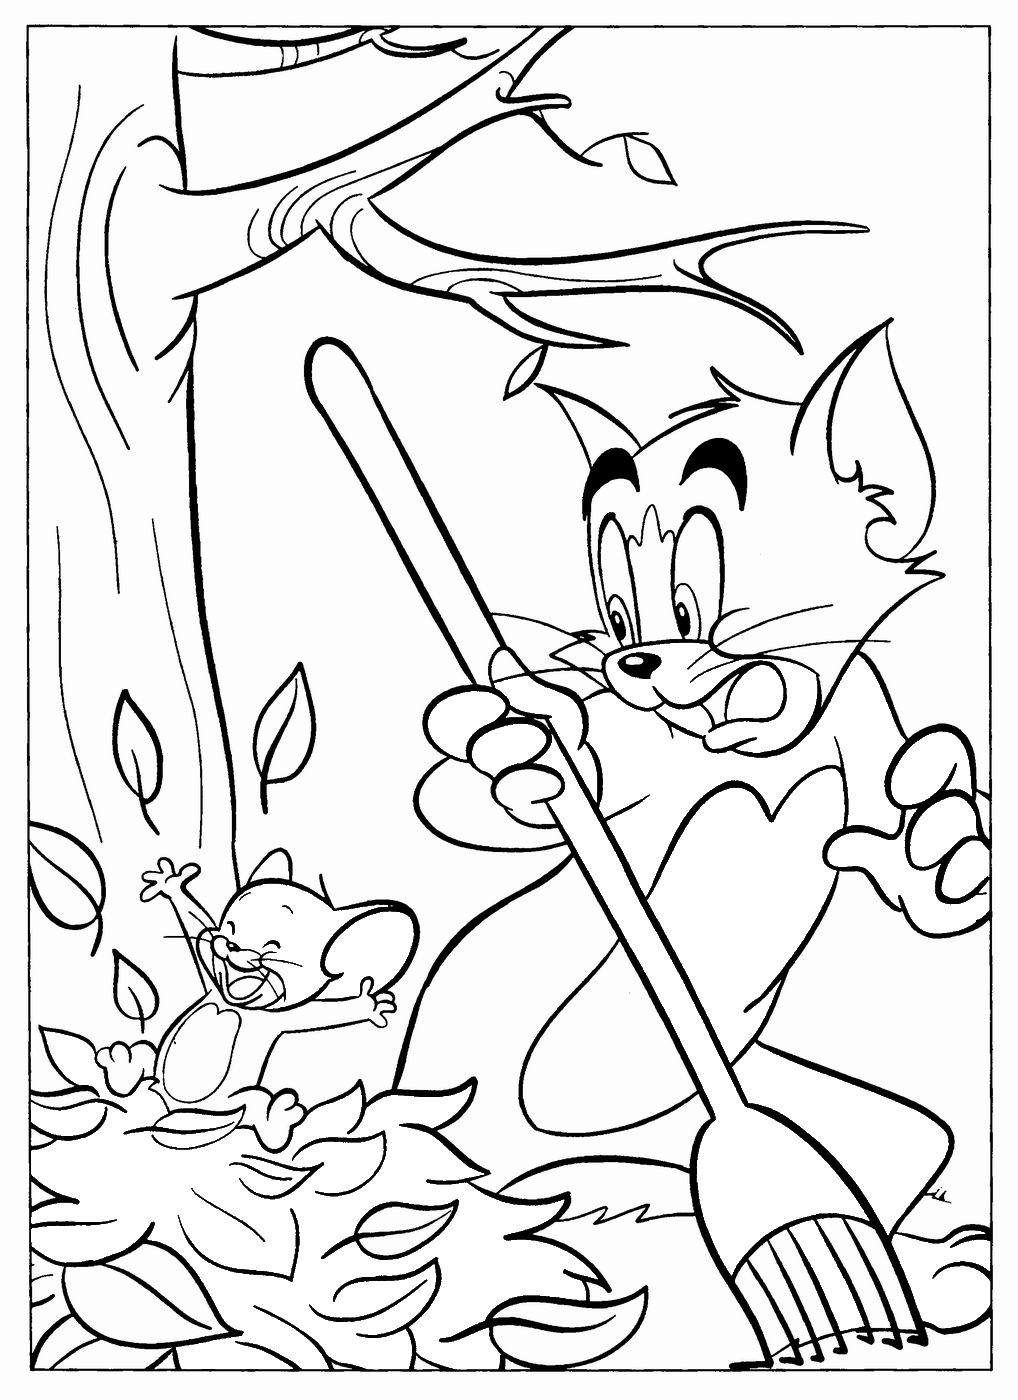 Tom and Jerry Coloring Pages TV Film tom_jerry_cl_20 Printable 2020 10150 Coloring4free